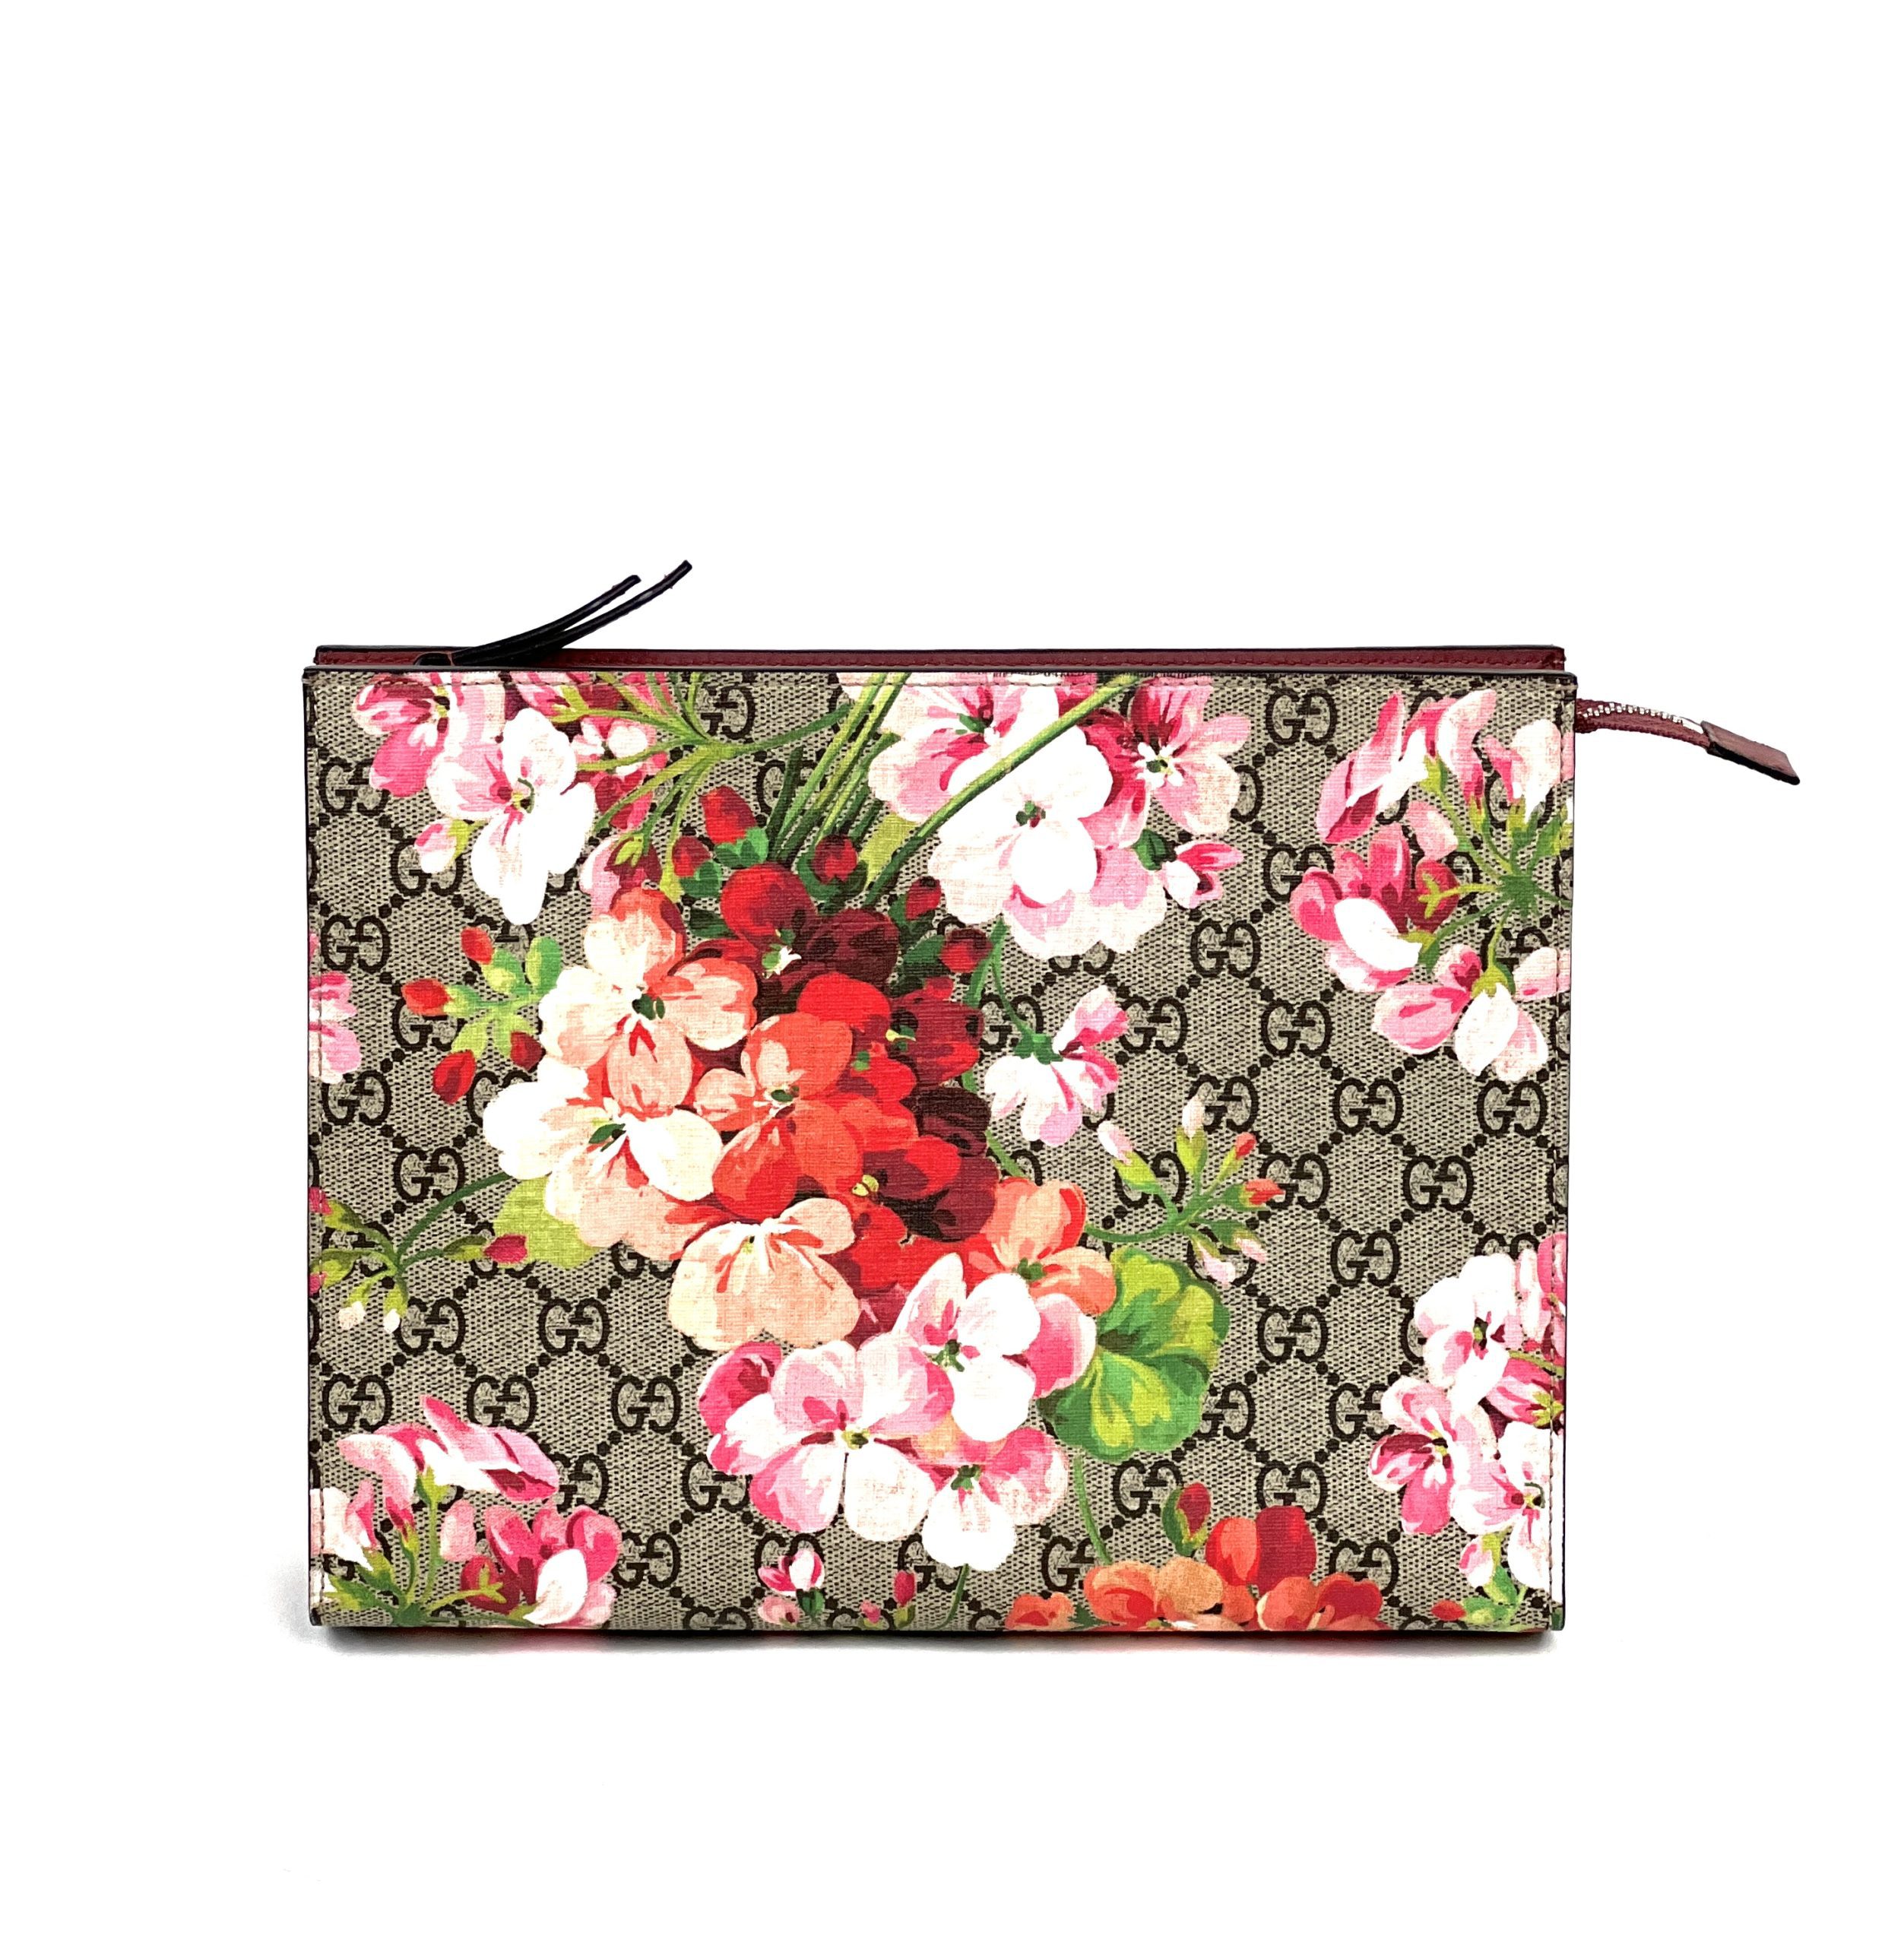 Gucci GG Blooms Large Cosmetic Case - Handbags - GUC265022